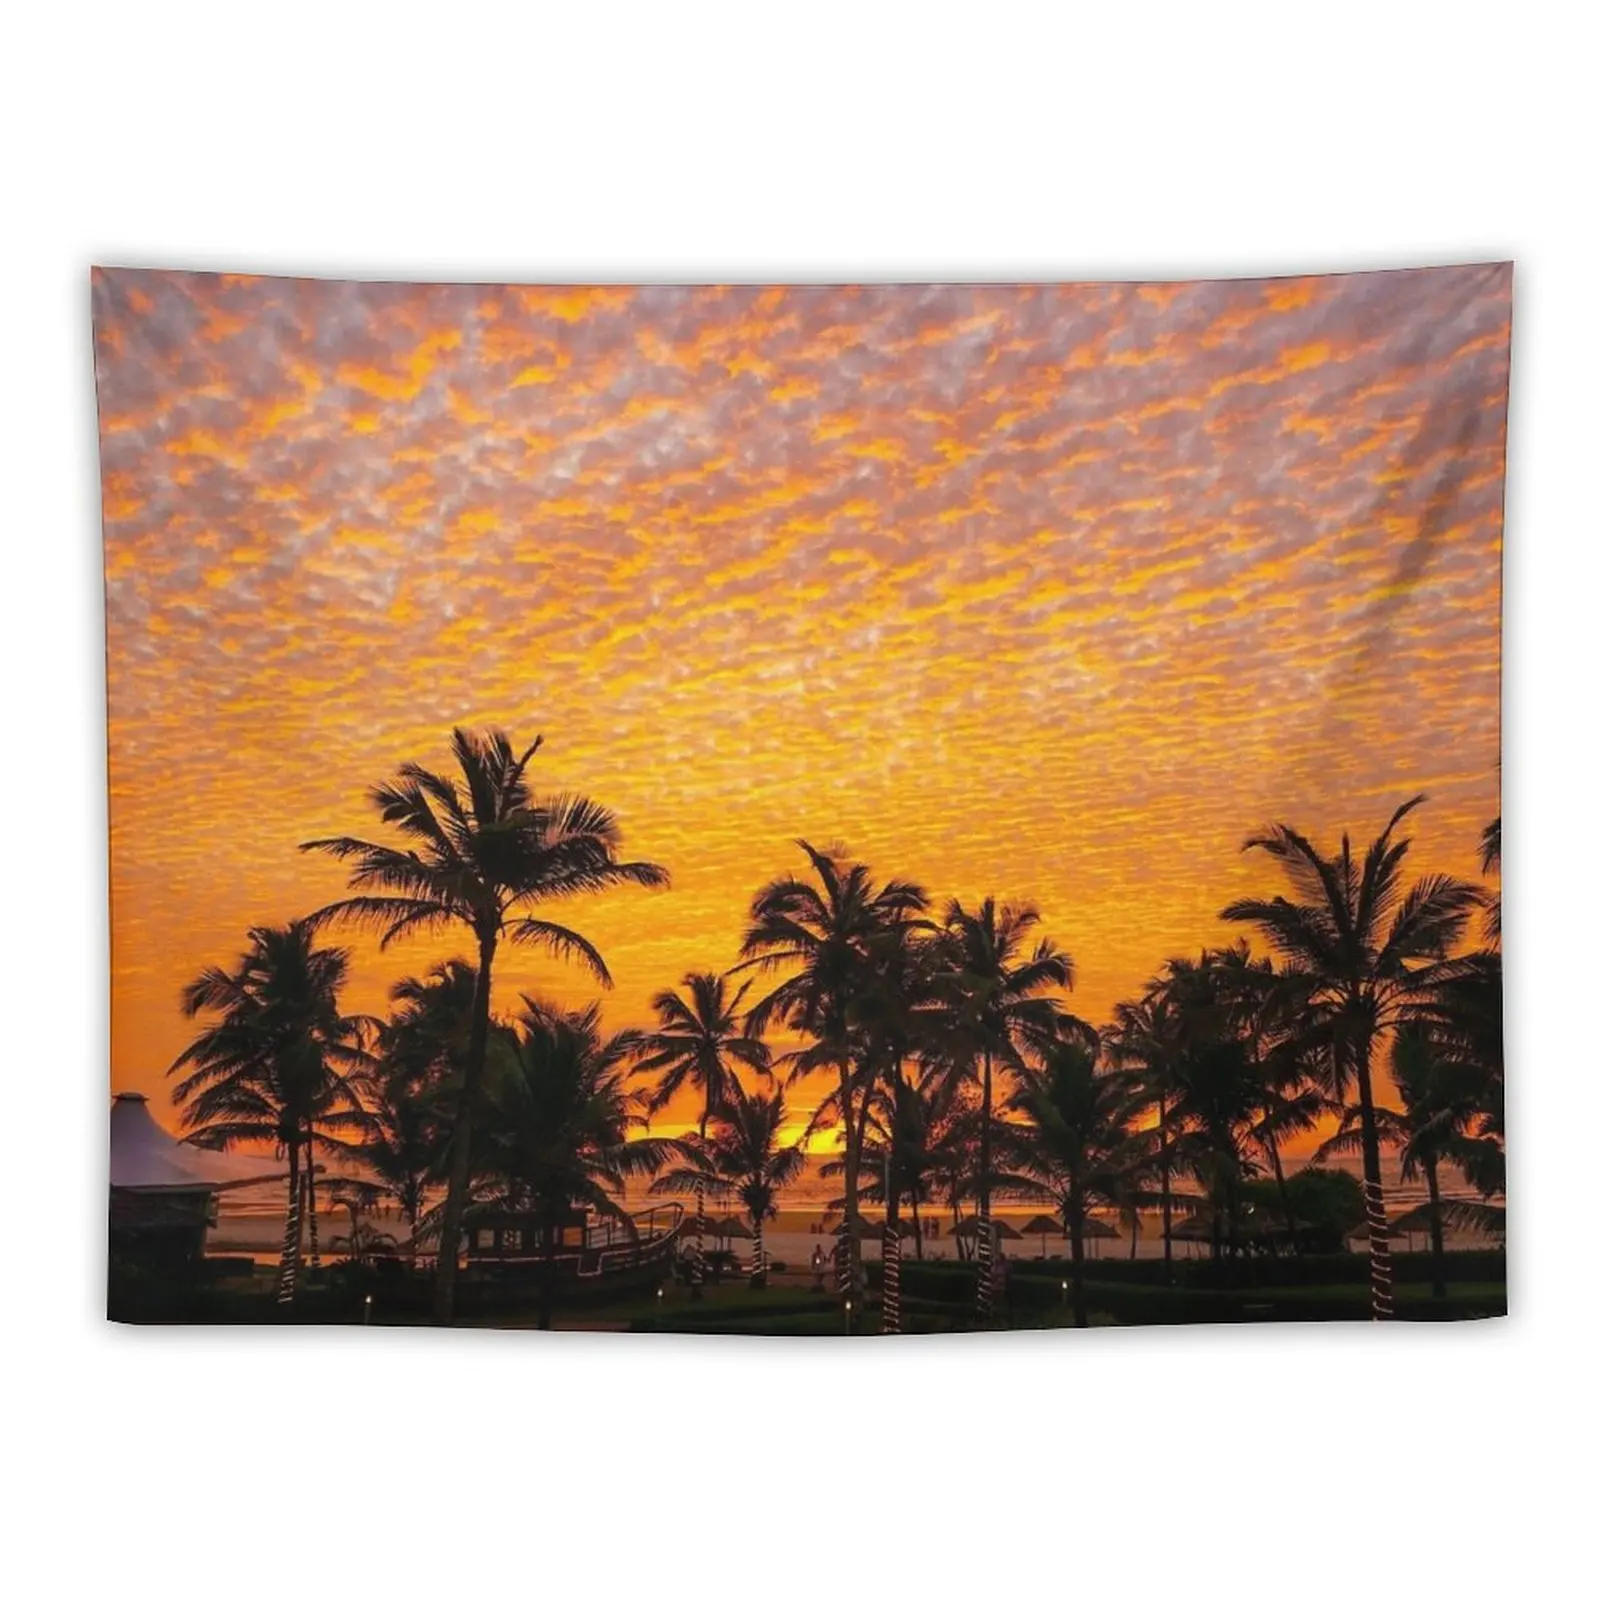 

India GOA Sunset Beach Sky Tapestry Aesthetic Room Decorations Home Supplies Things To Decorate The Room Wall Decorations